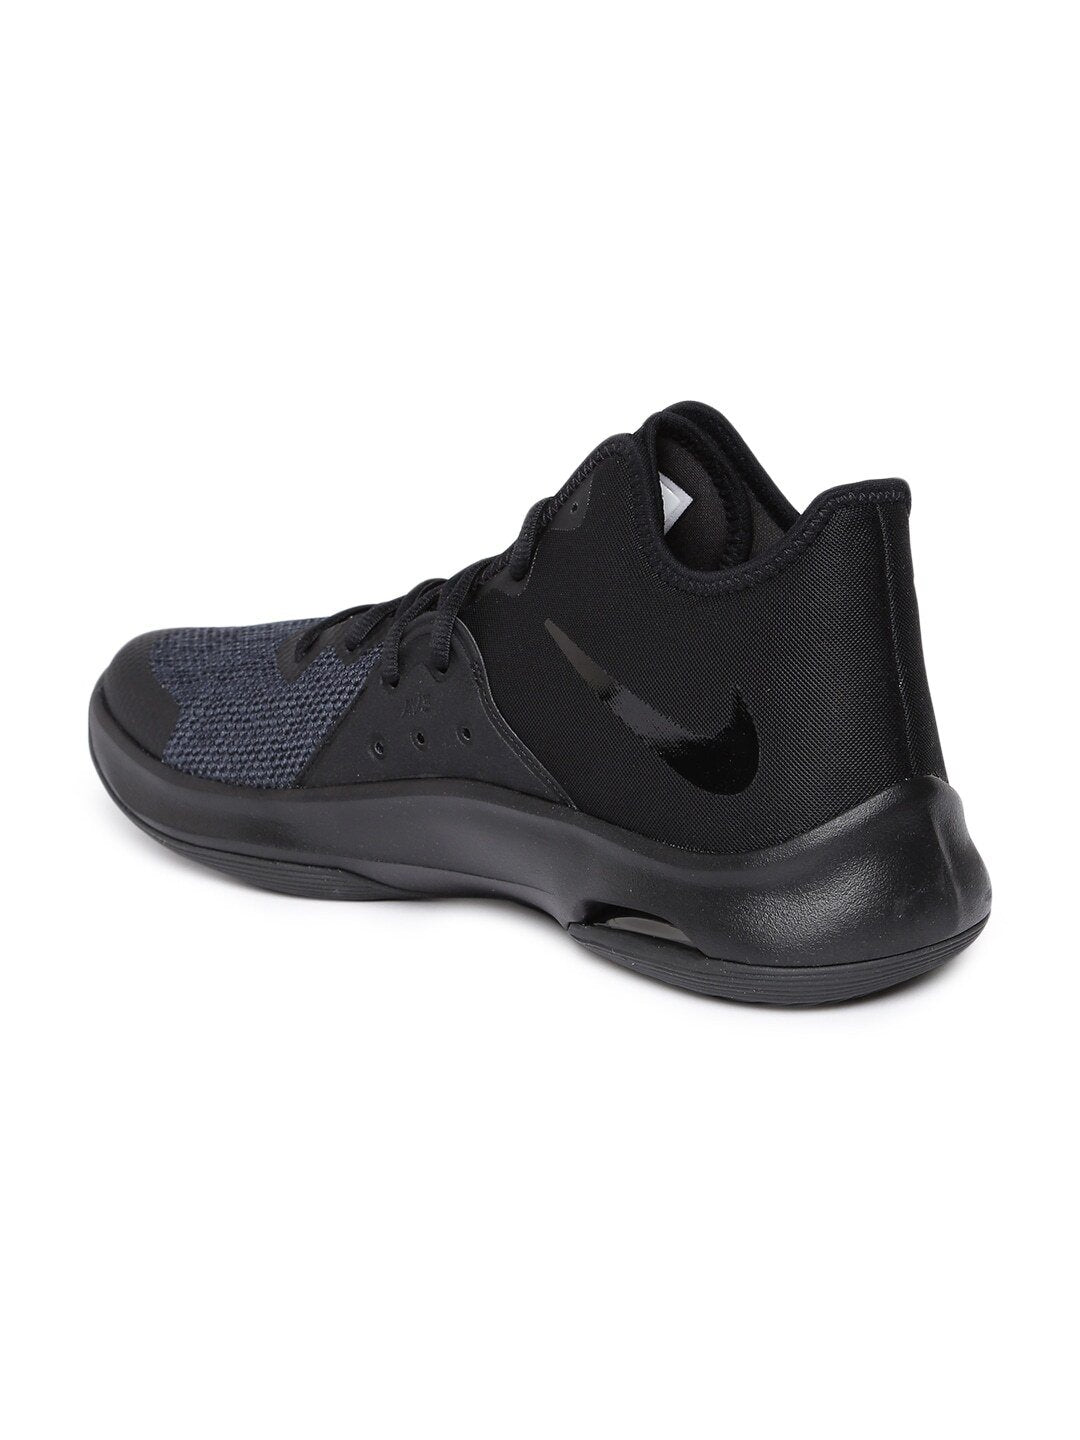 AIR VERSITILE III Basketball Shoes - Discount Store